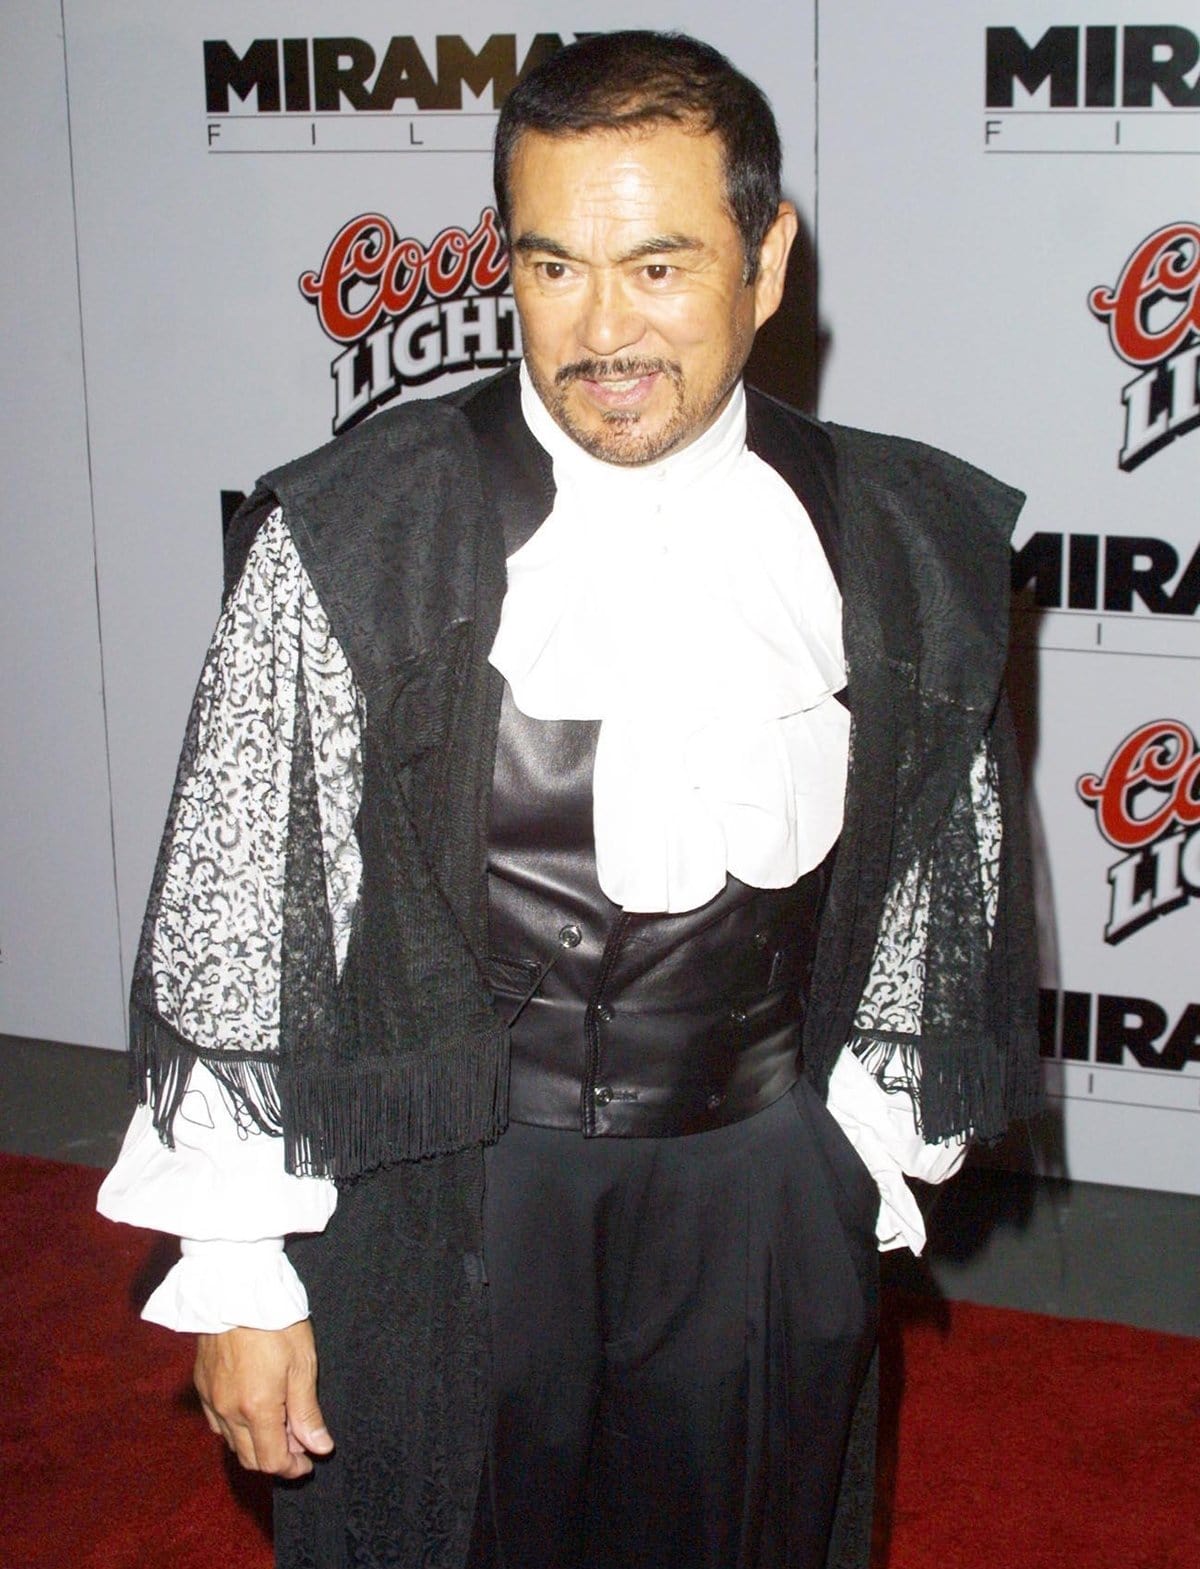 Japanese actor and martial artist Sonny Chiba died from complications of COVID-19